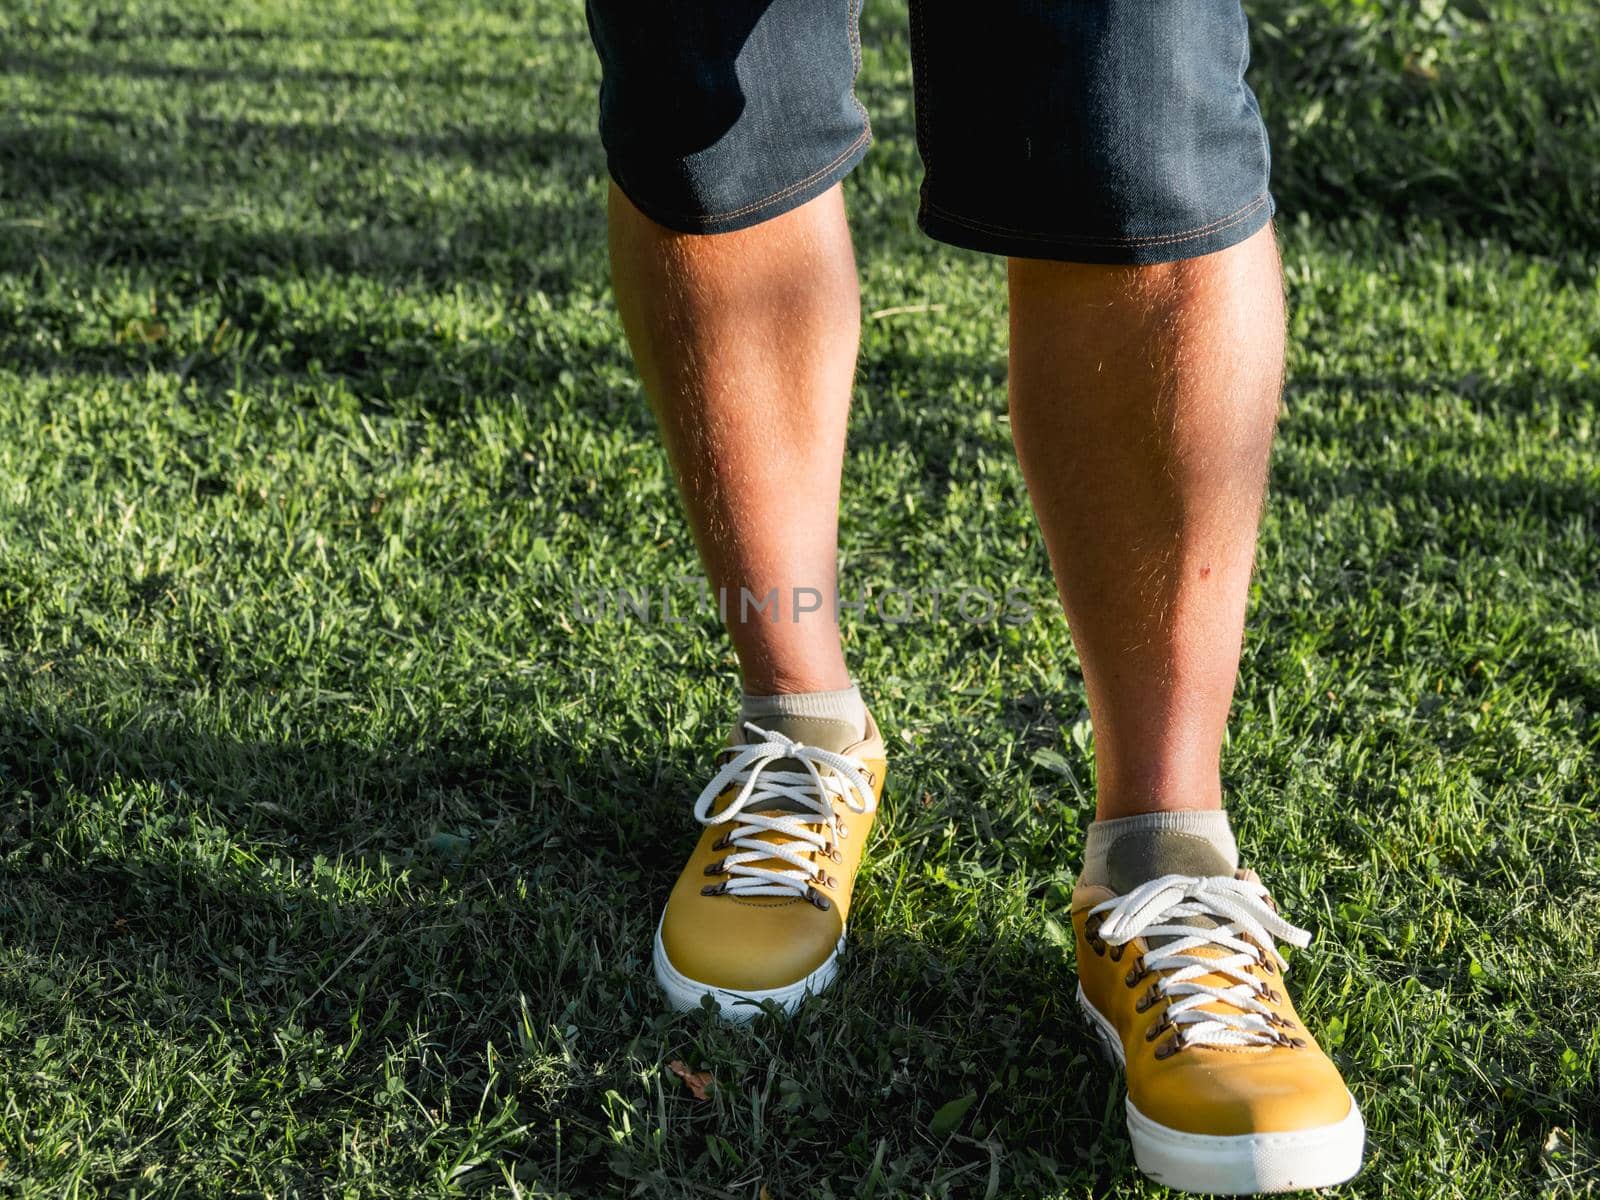 Man in bright yellow sneakers is standing on green grass lawn in park. Modern hipster's shoes. Urban fashion.